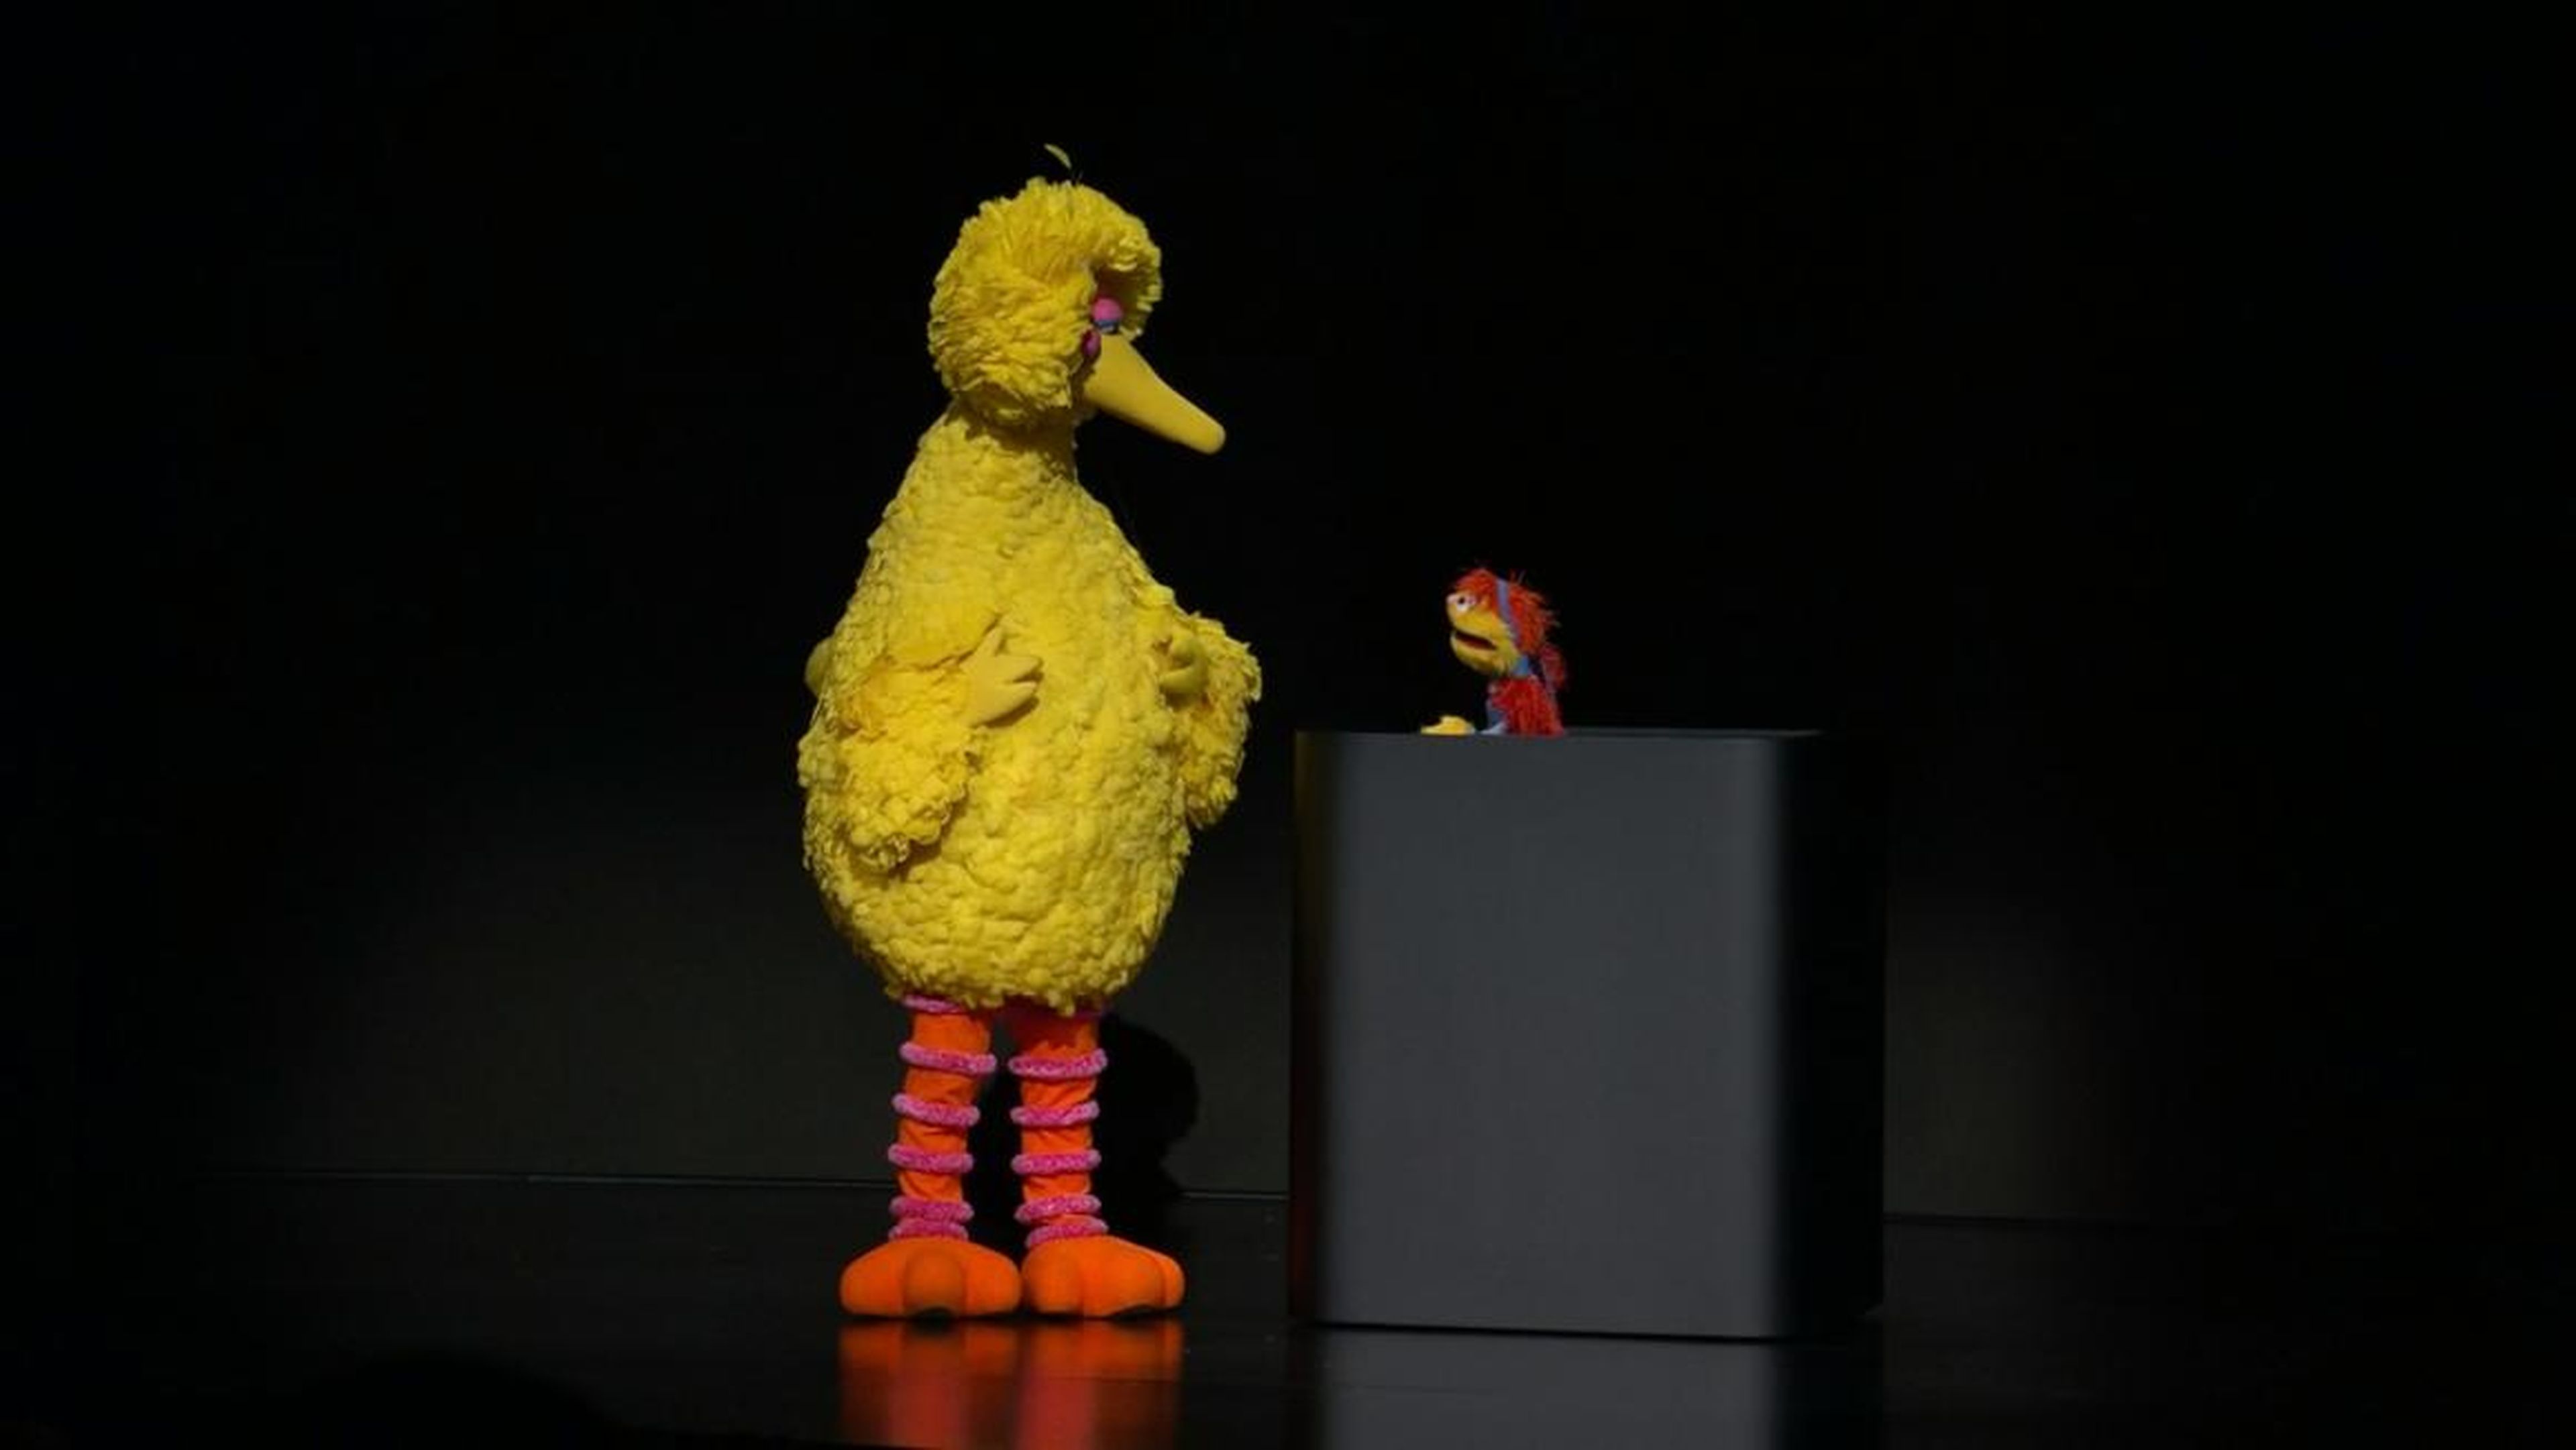 Muppets Big Bird and Cody from "Sesame Street" introduced a brand-new pre-K show called "Helpsters," which uses the logic of coding to help children solve problems.